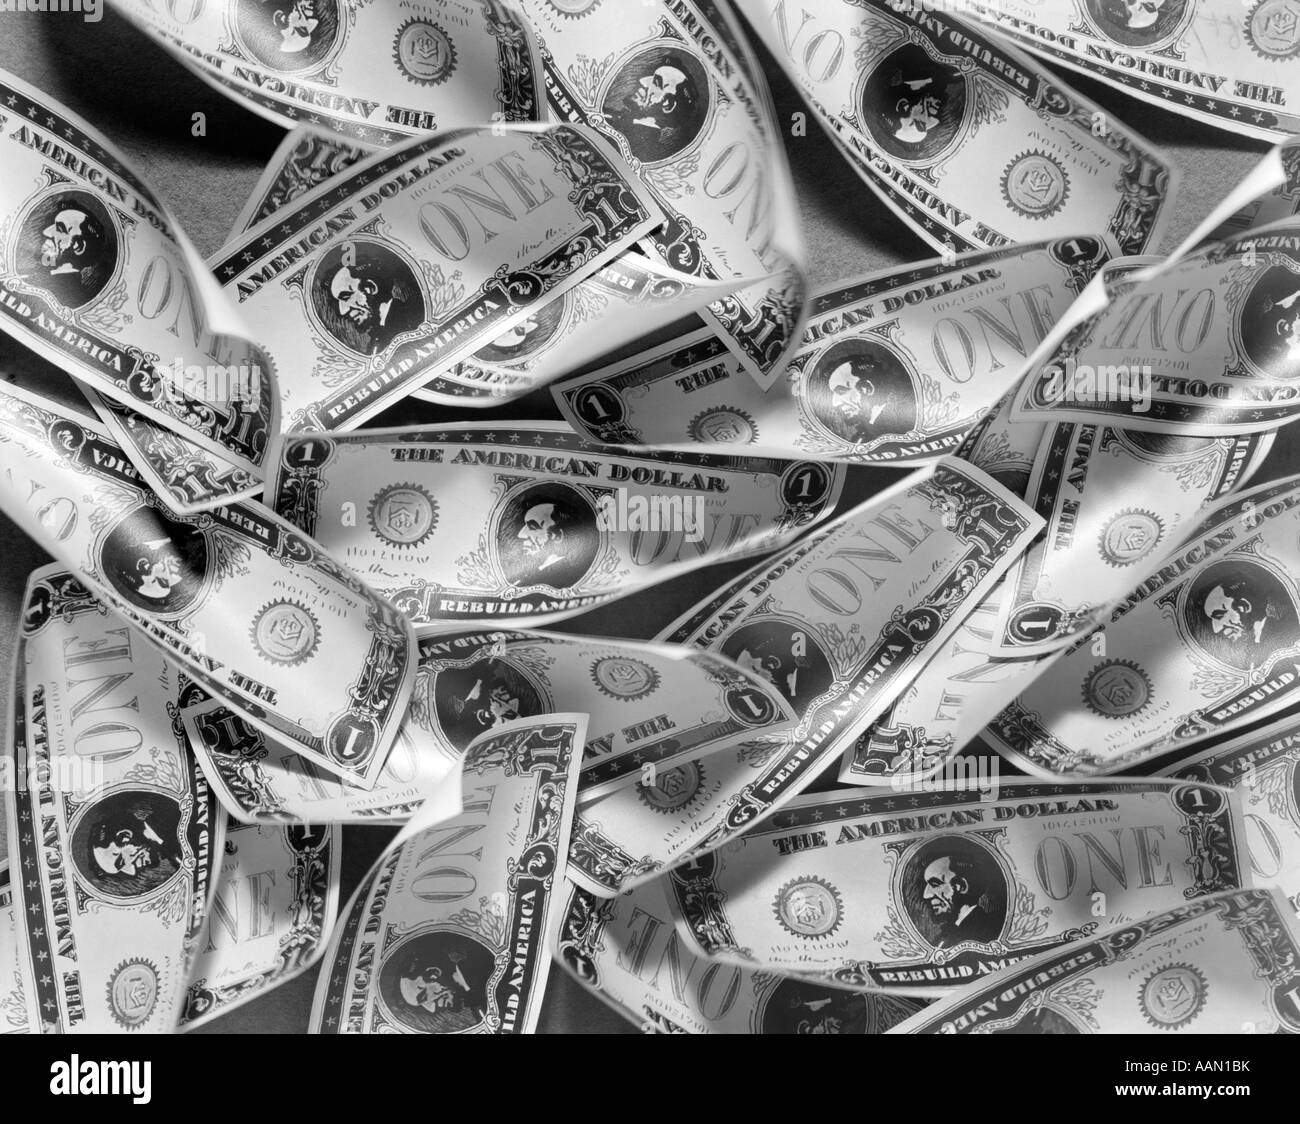 Paper money Black and White Stock Photos & Images - Alamy